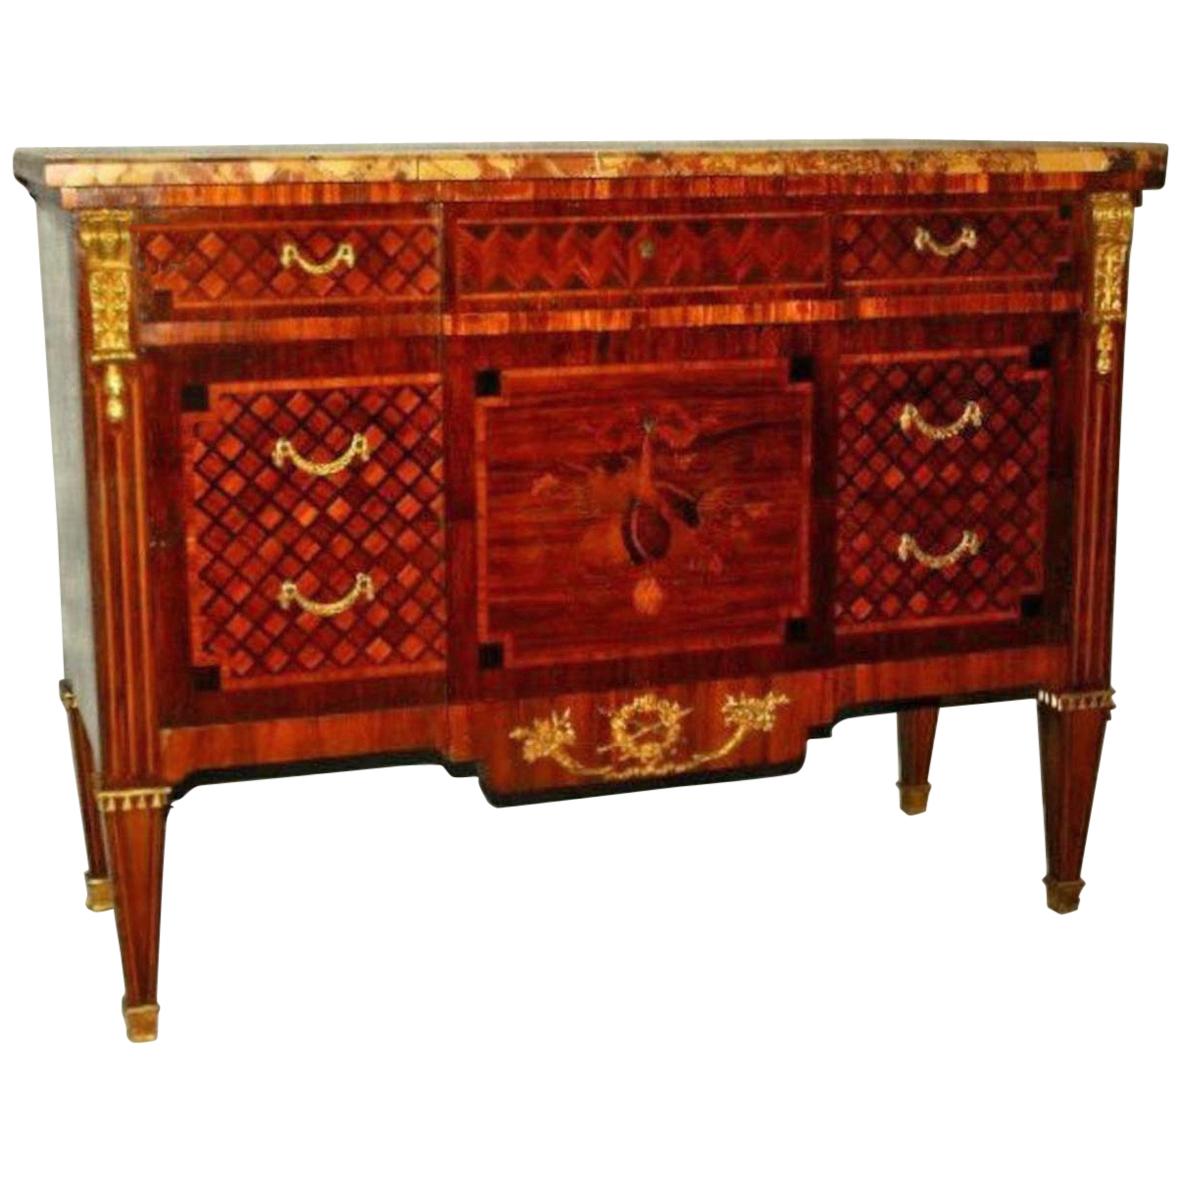 18th-19th Century Louis XVI Marquestry and Parquestry Marble-Top Commode For Sale